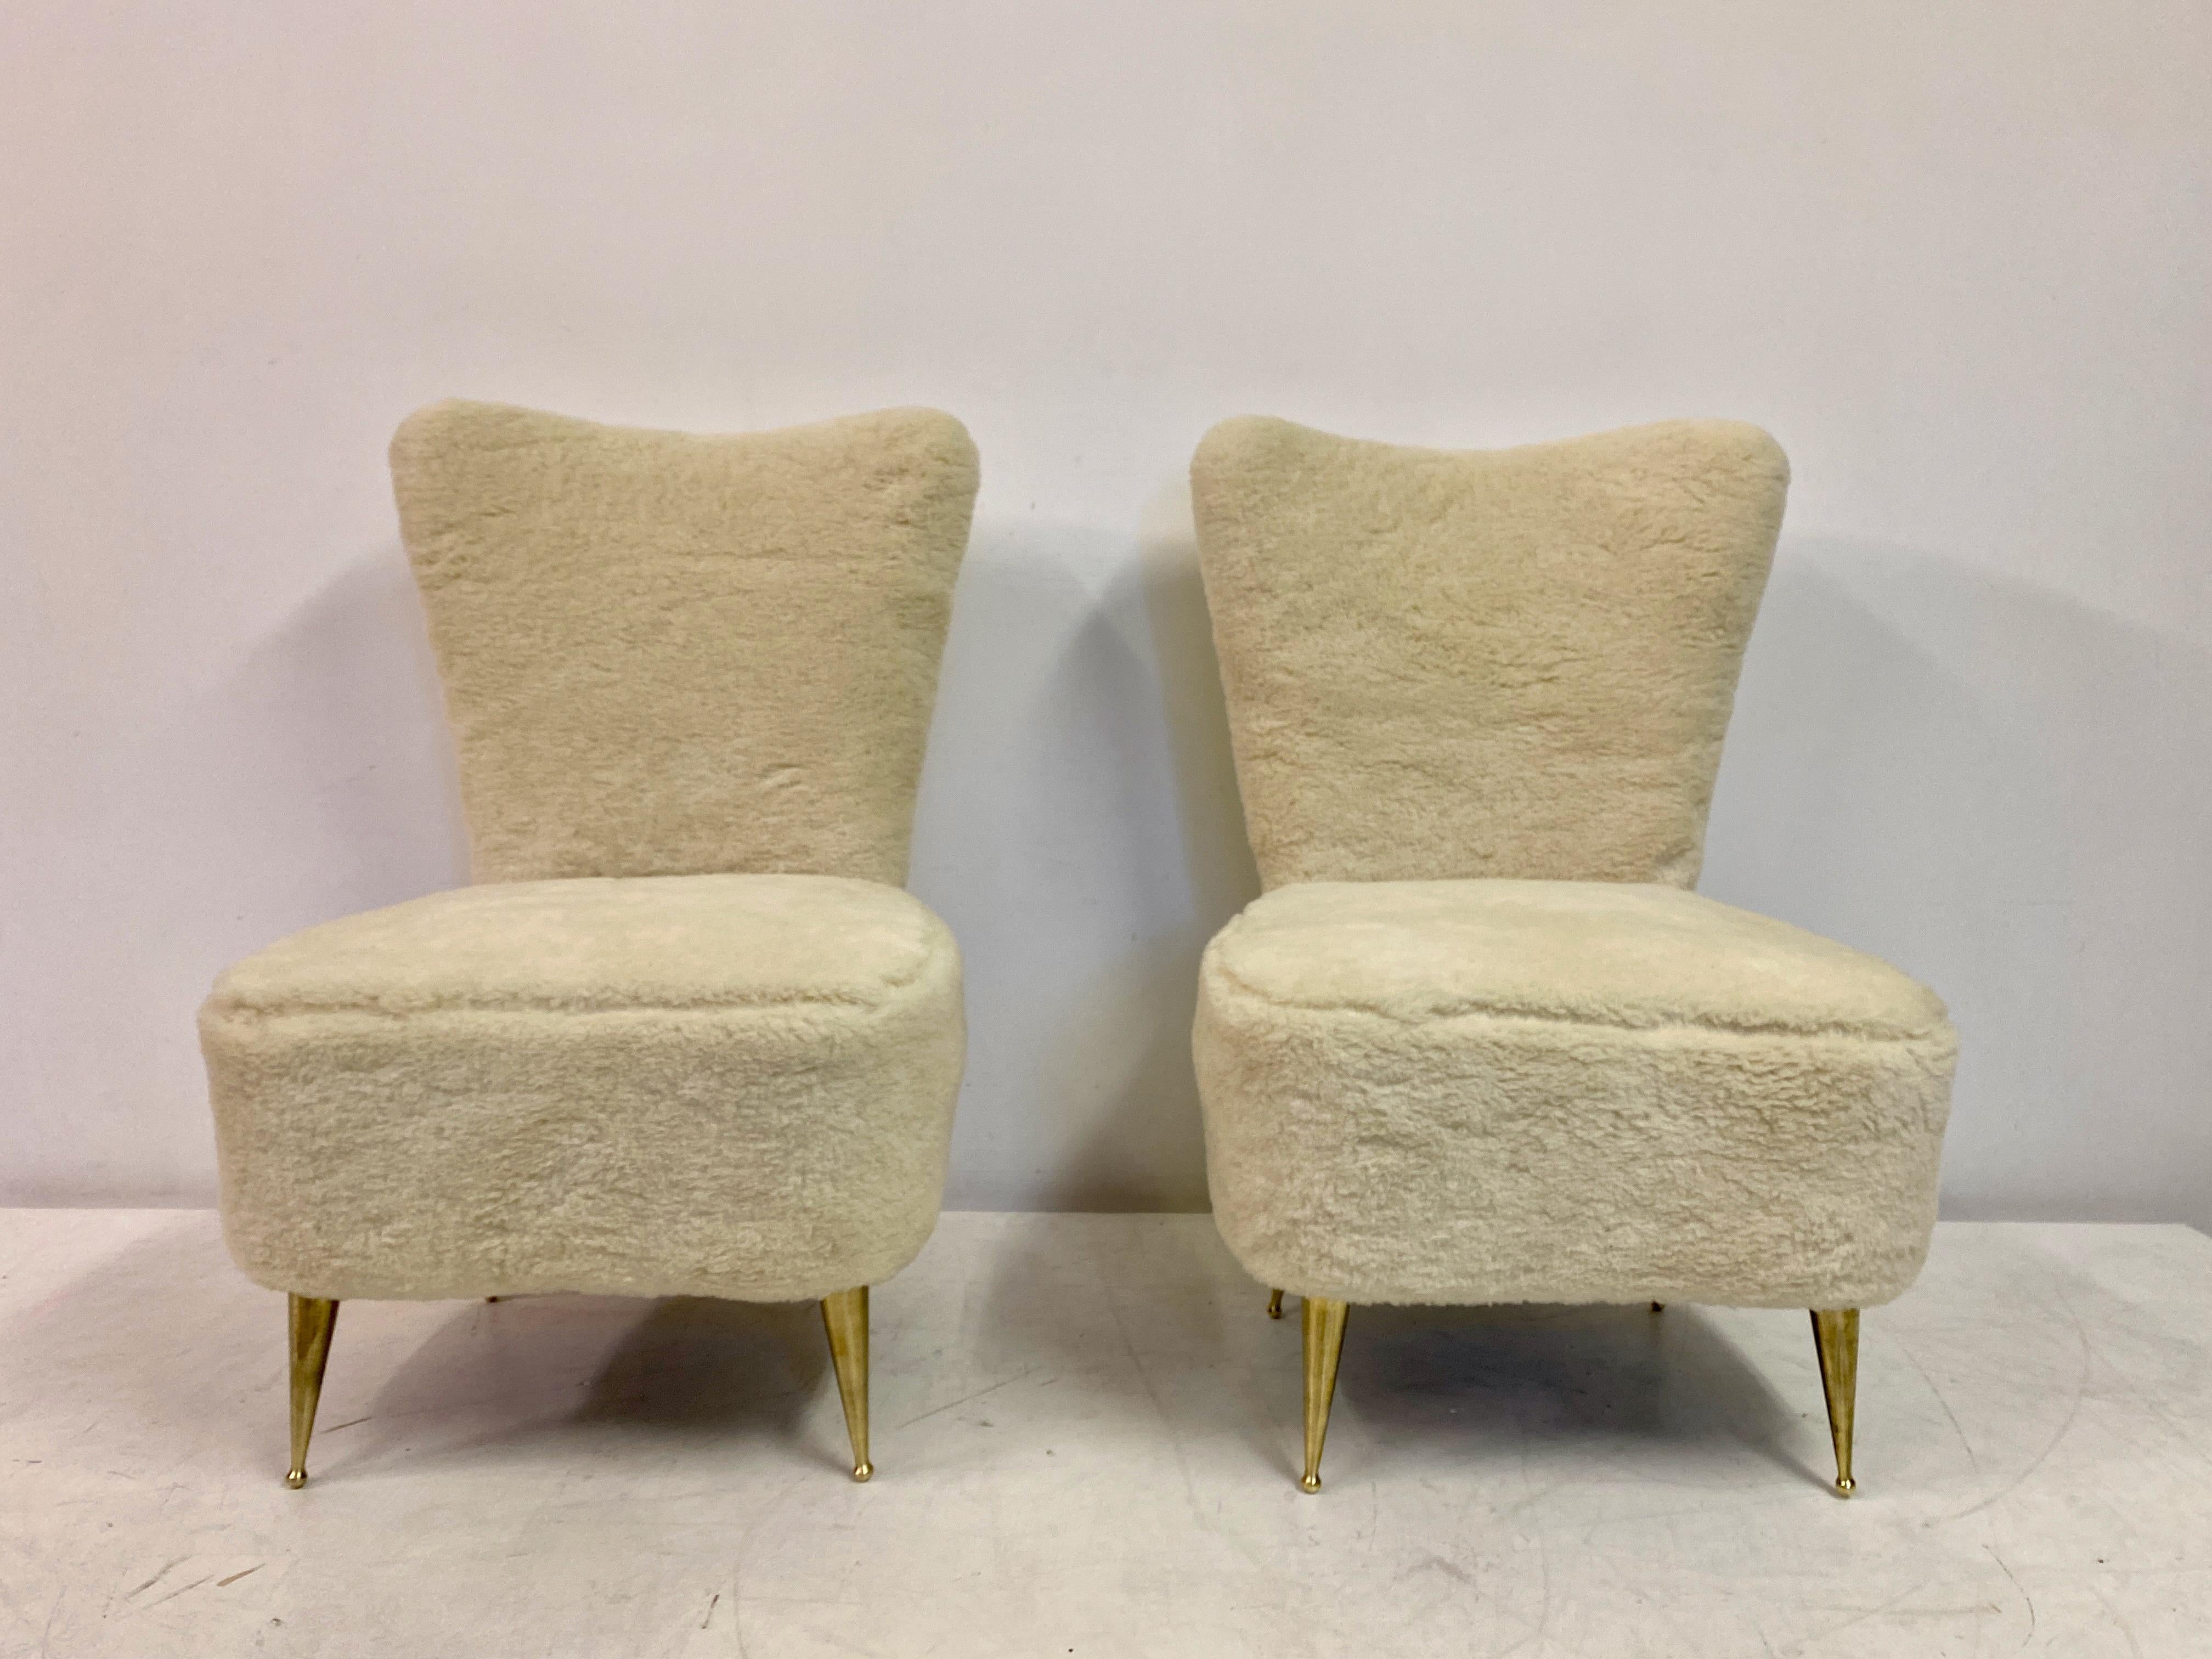 Pair of slipper chairs

New Designers Guild faux fur upholstery

Brass legs

Seat height 40cm

Italy 1950s